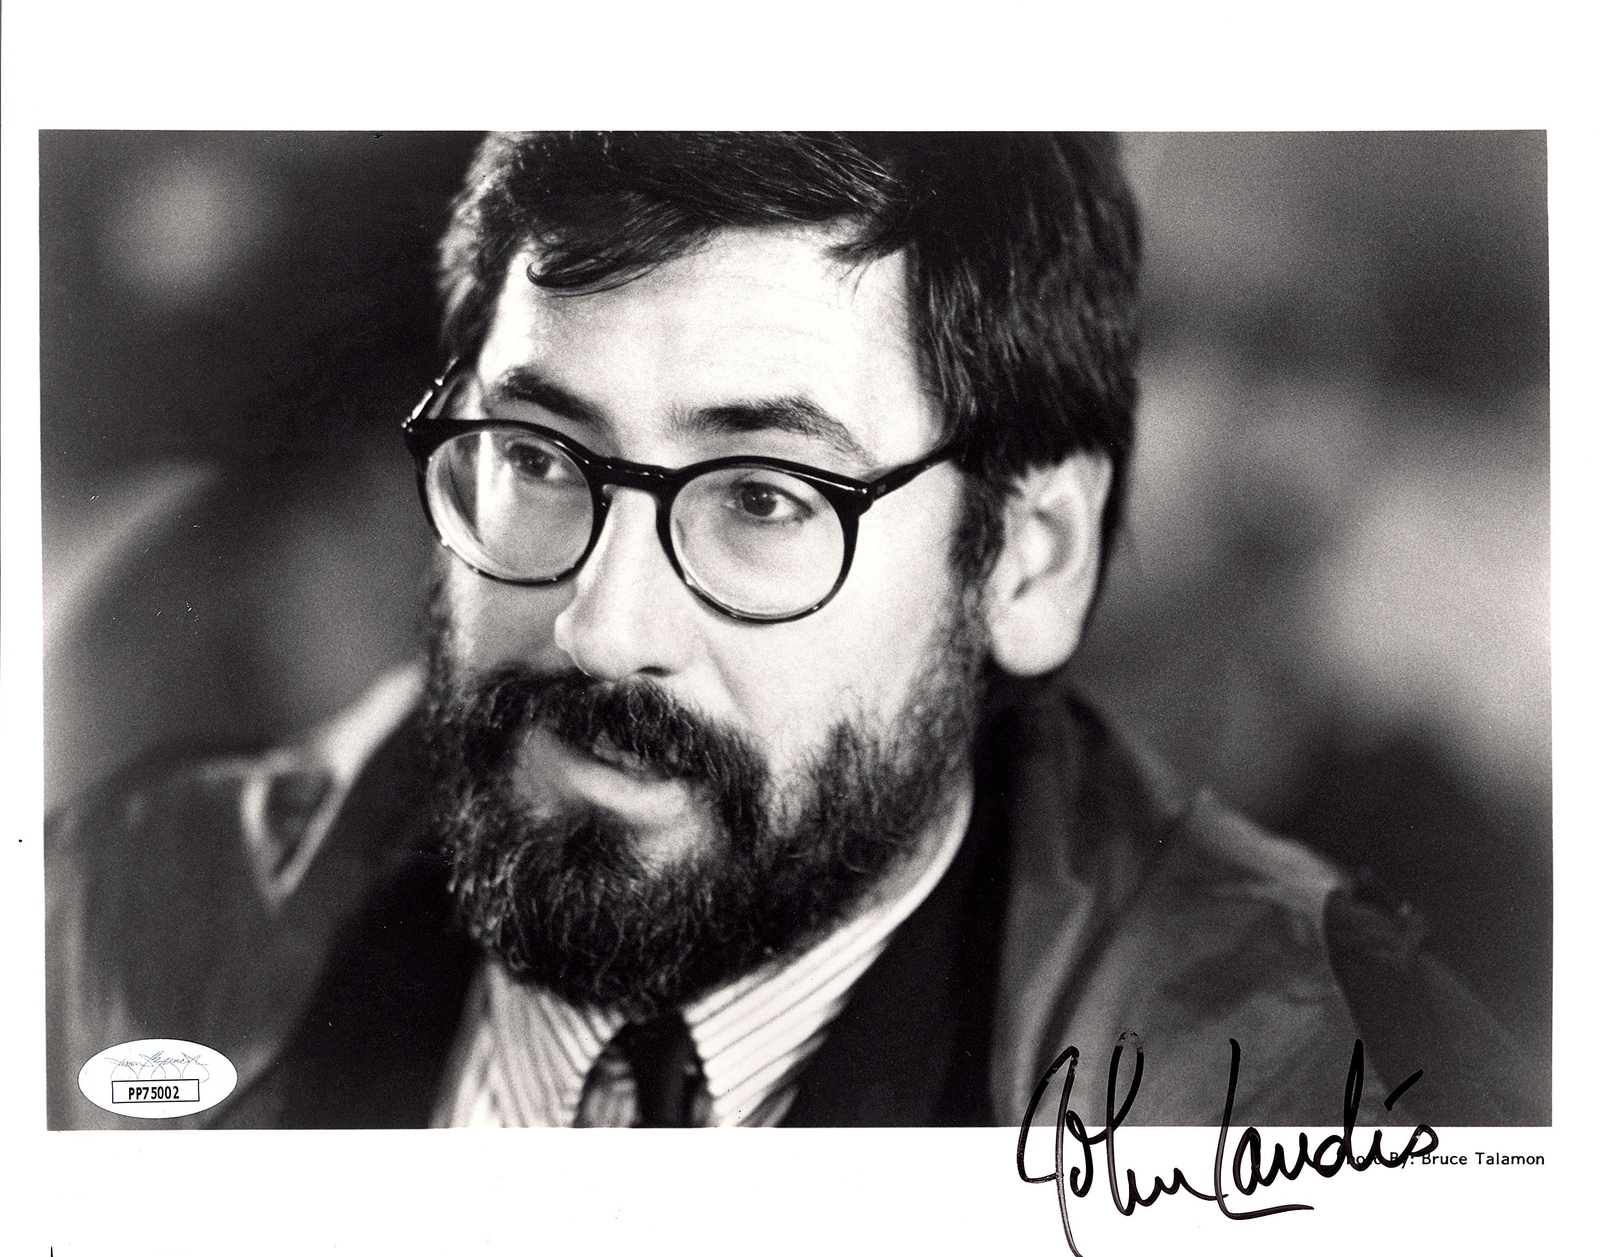 Primary image for JOHN LANDIS Autographed Signed 8x10 PHOTO DIRECTOR ANIMAL HOUSE JSA CERTIFIED 